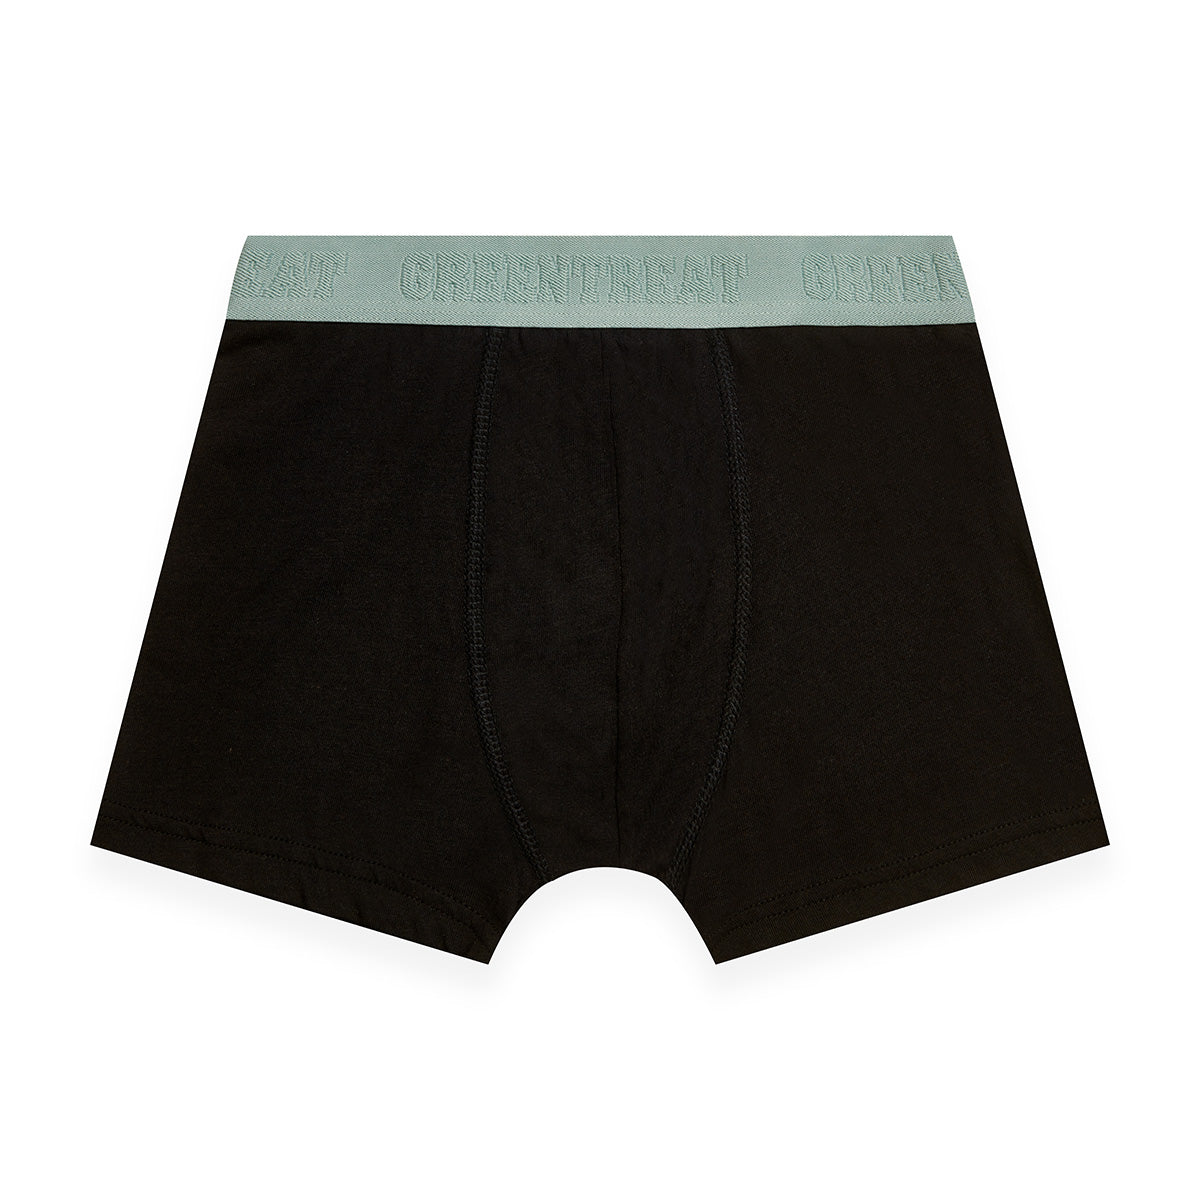 Greentreat Pack Of 3 Boys Bamboo Boxers